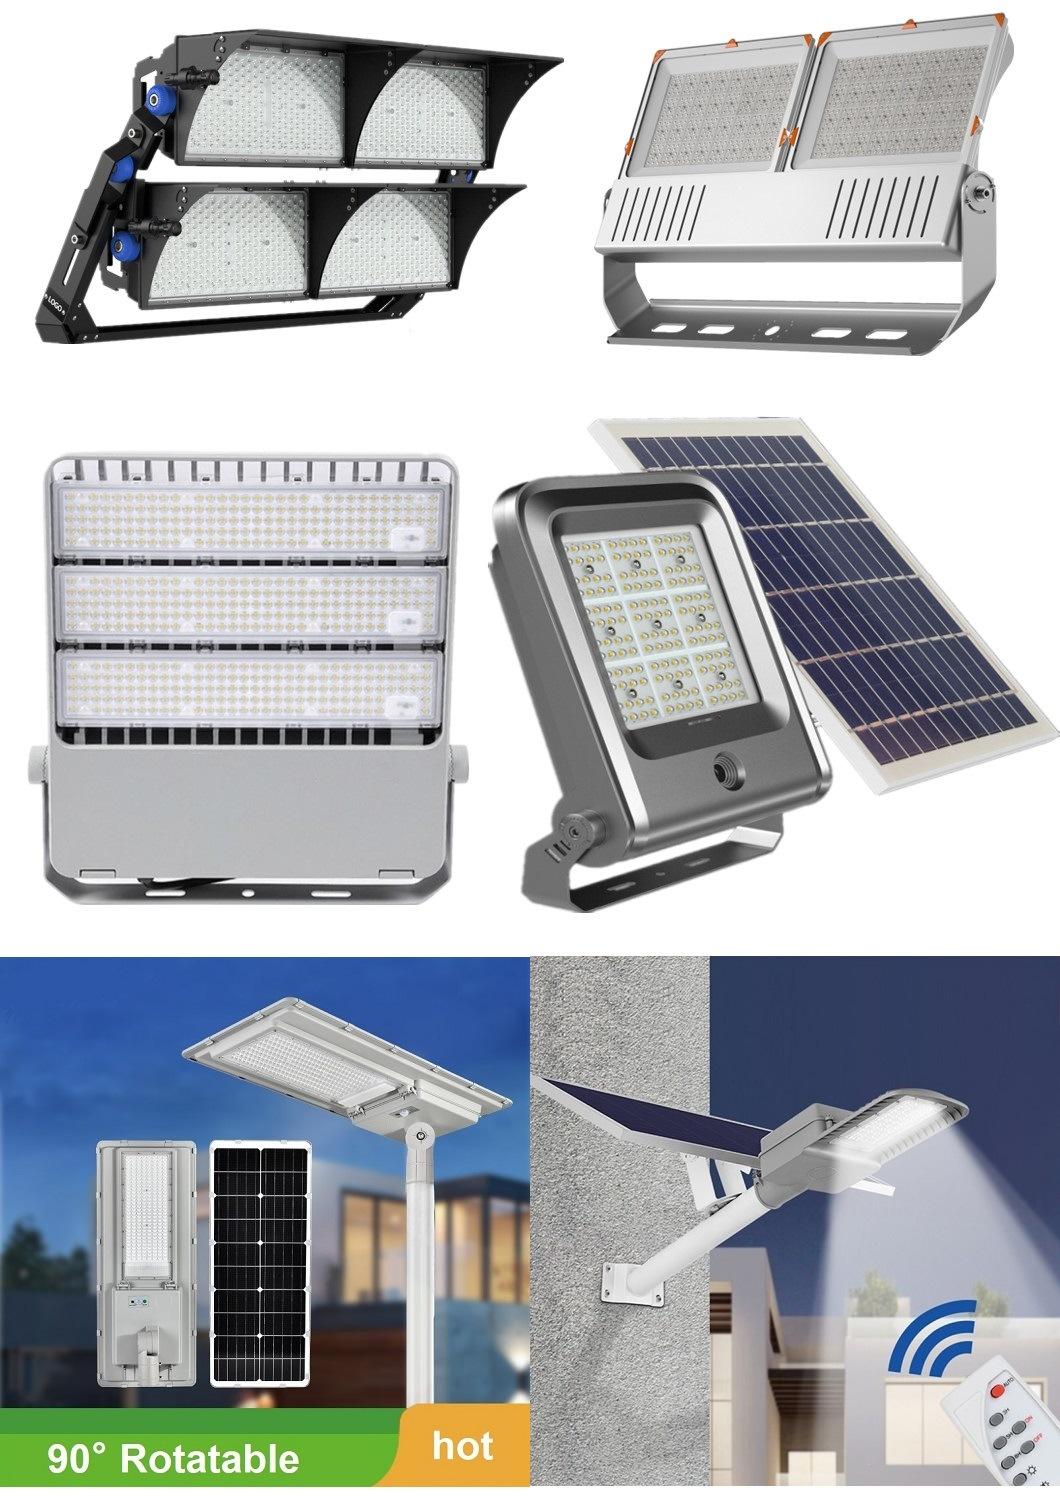 New and Hot Sale Flood Light LED with Cheap Price Wholesale for Distributor 30W T0 300W